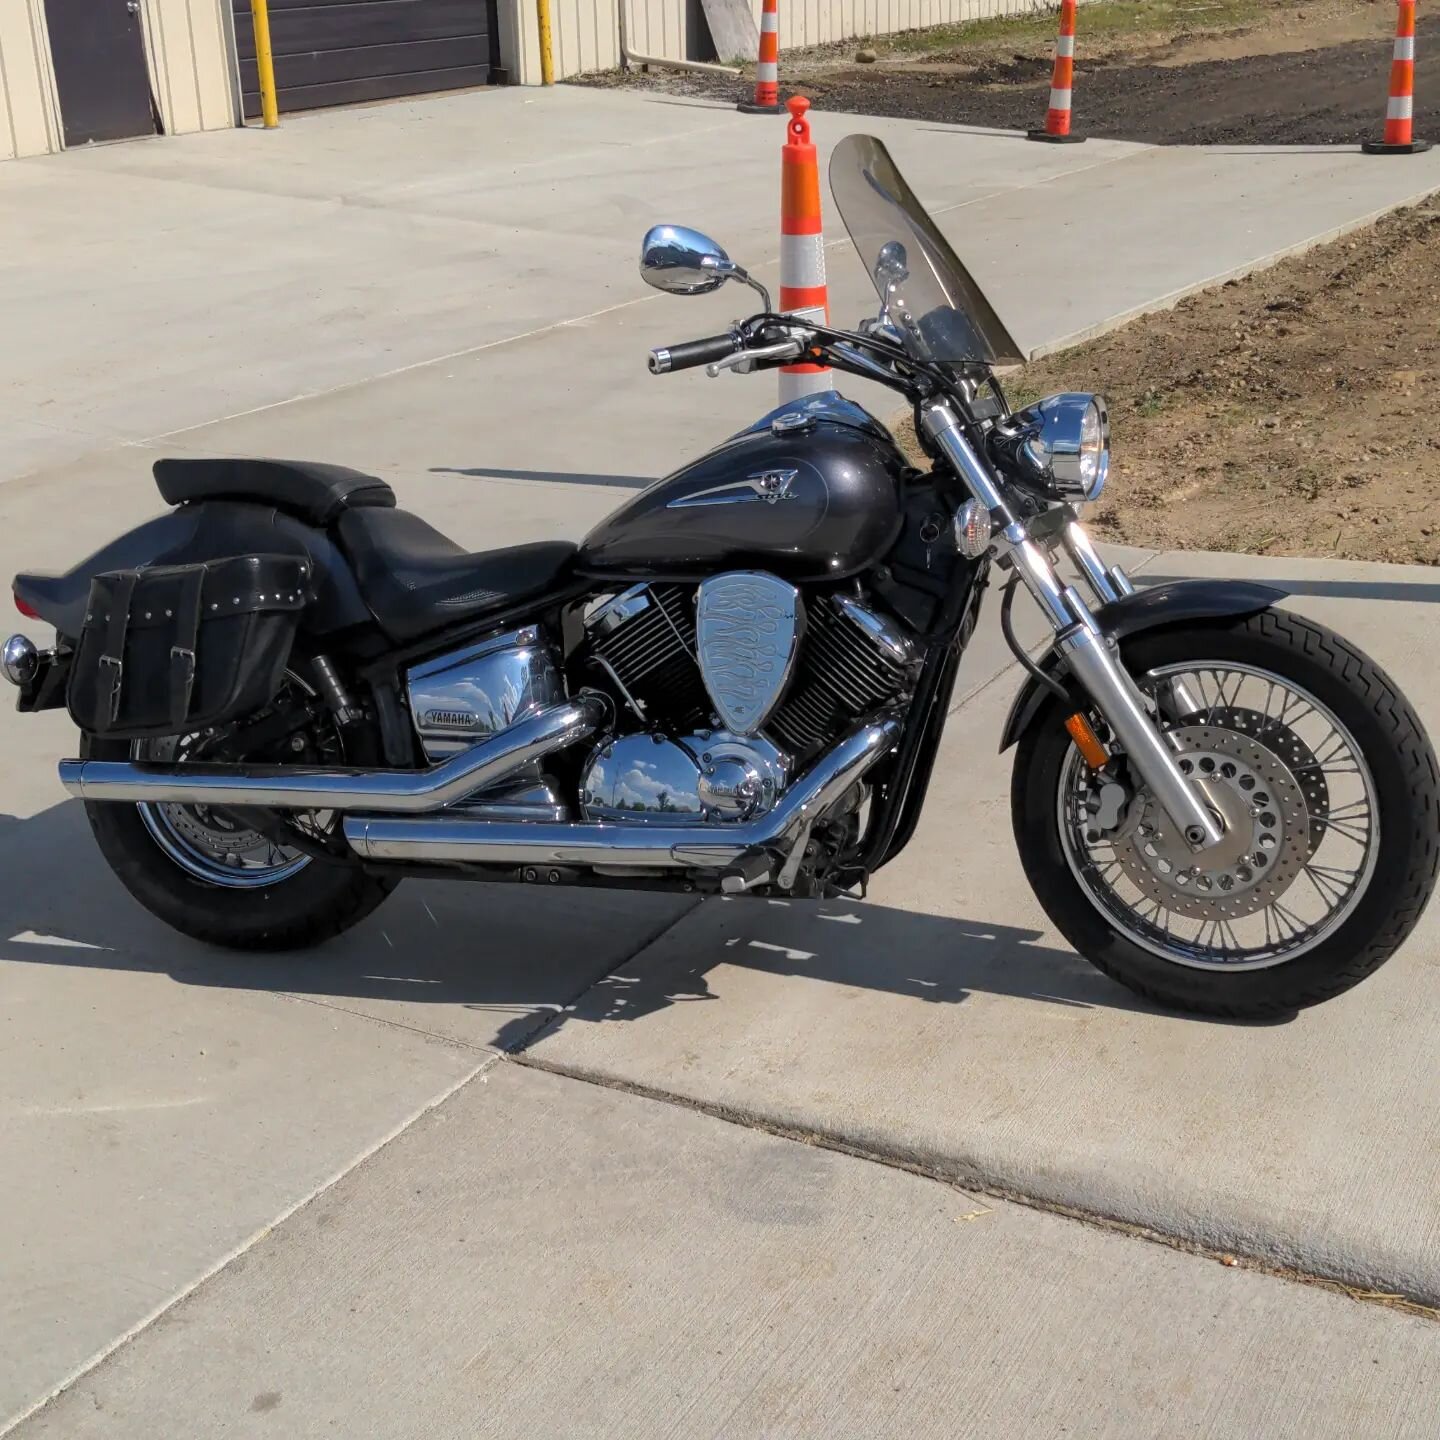 Who's in the market for a bike?! 2005 Yamaha vstar1100. 25k on the clock, exhaust air cleaner and jetted. Fully serviced new rear tire, battery. $3500